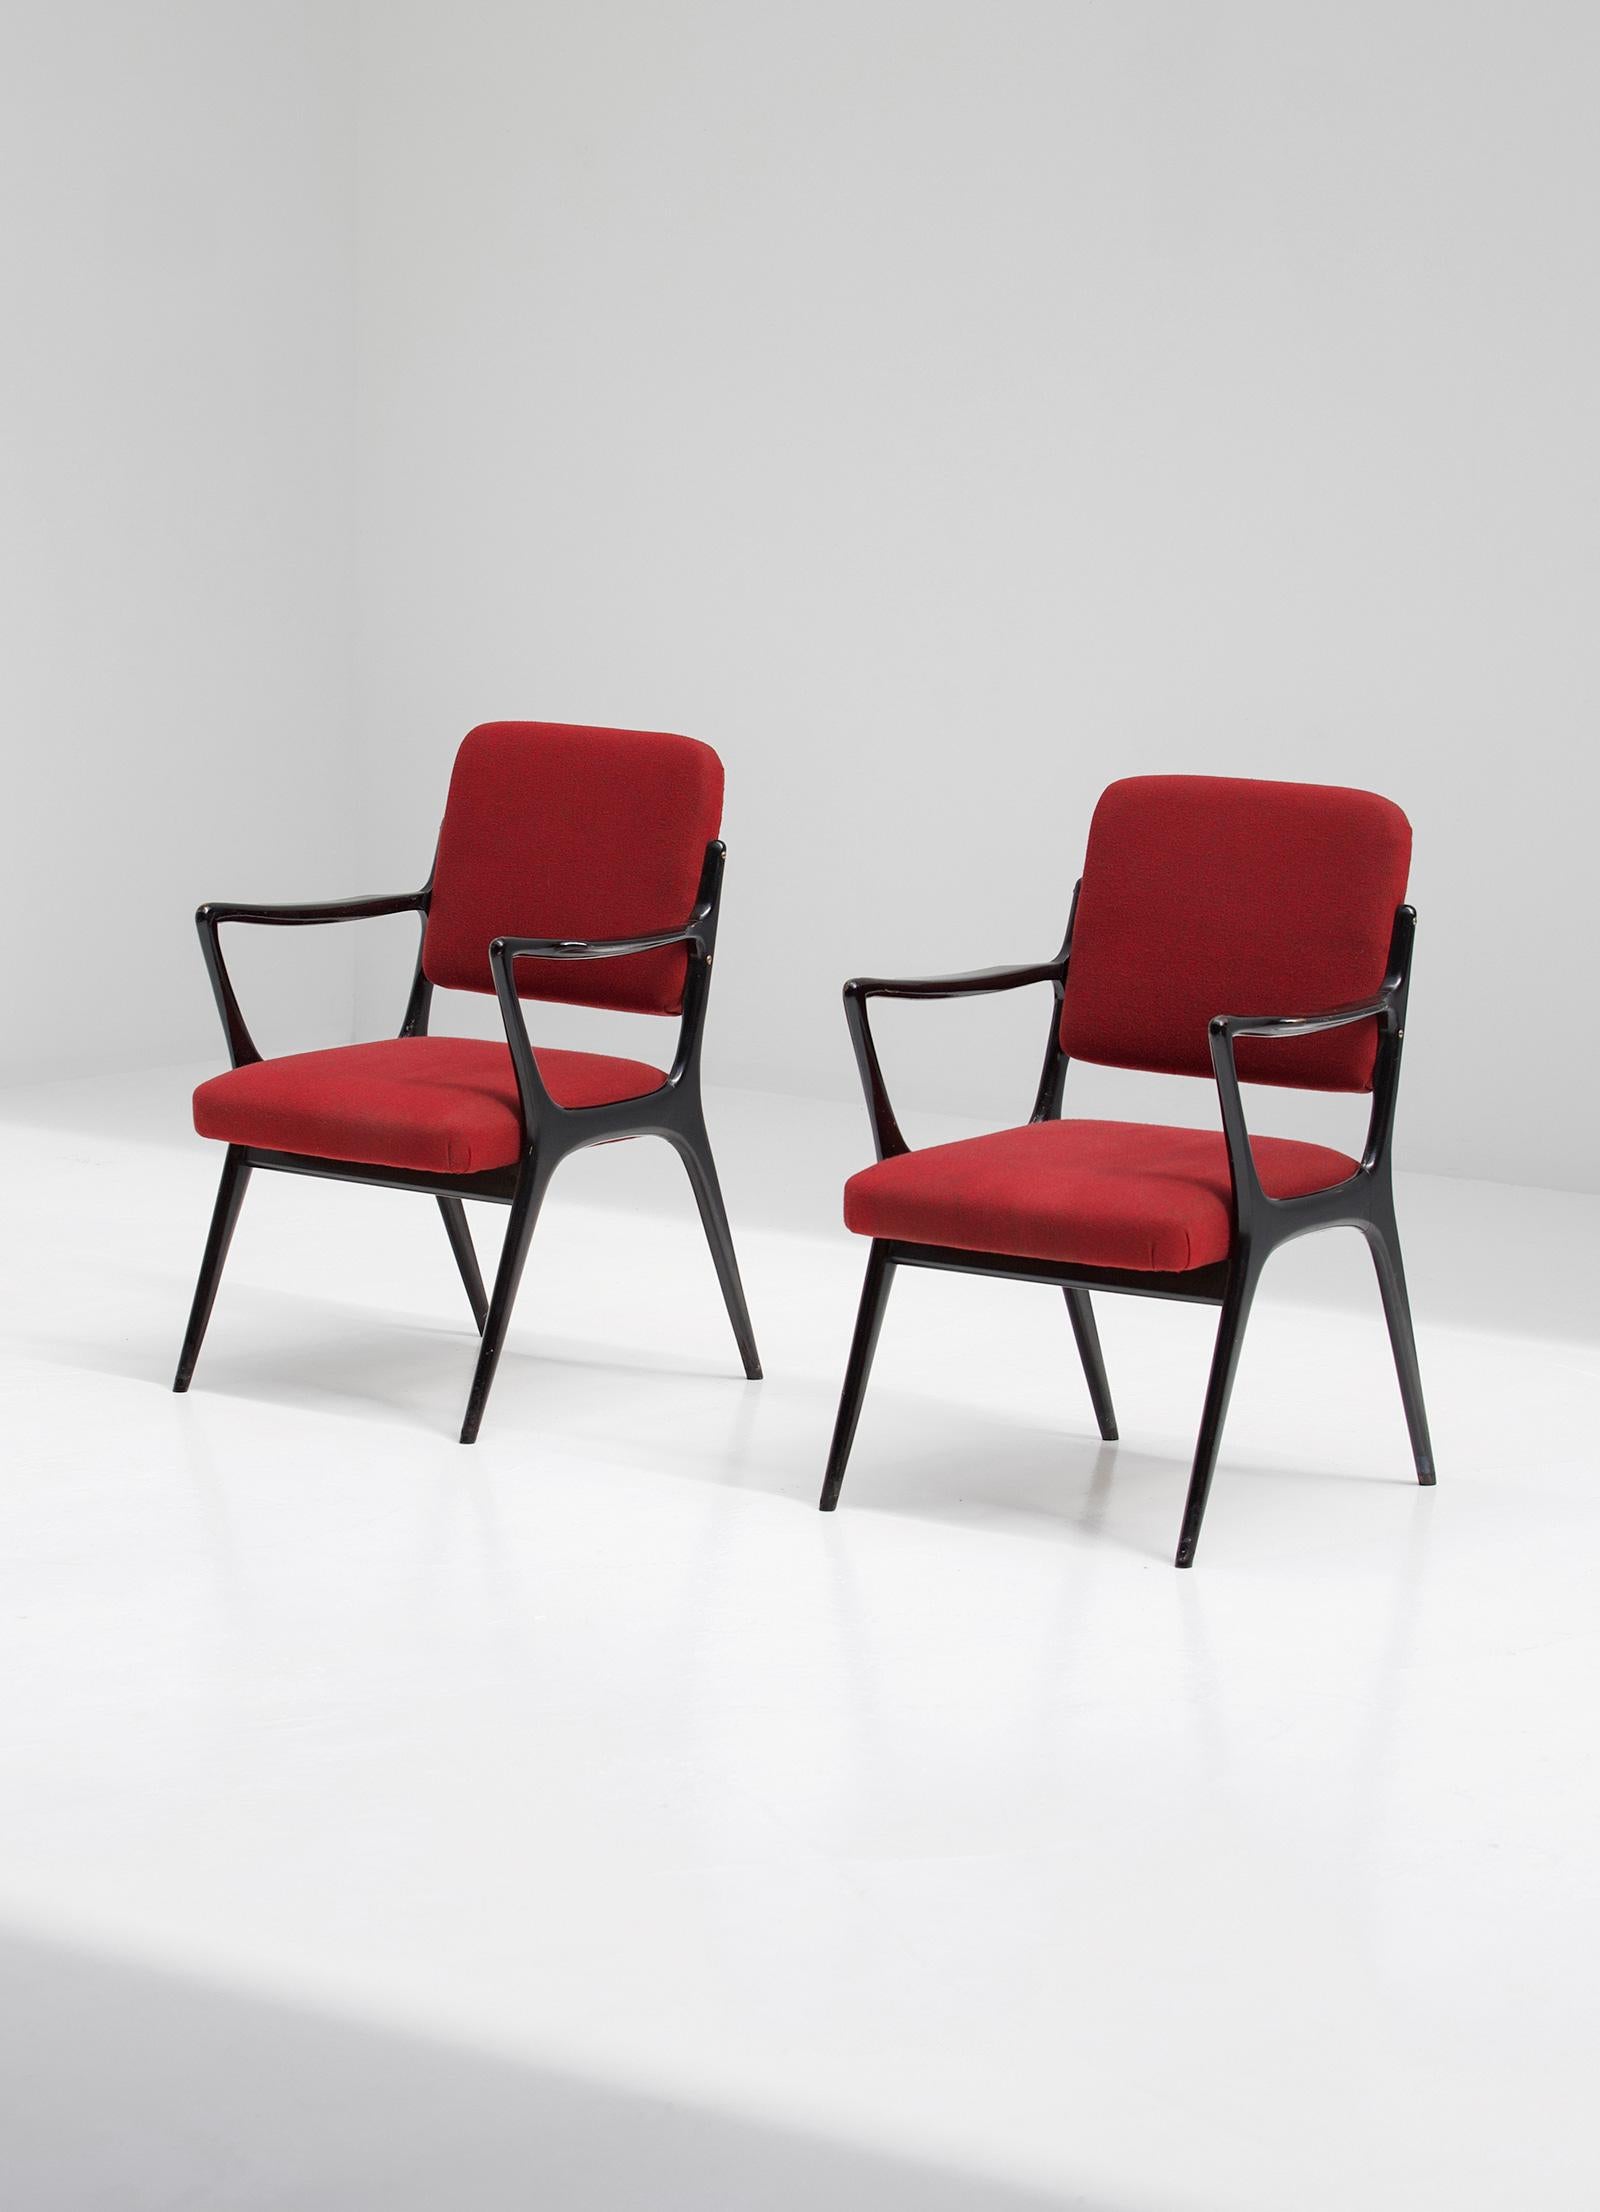 Gio Ponti style, 1950s, Mid-Century Modern, Alfred Hendrickx for Belform, Belgium, 1950s

Pair of side or dining armchairs designed by Alfred Hendrickx for Belform in the mid-1950s. The chairs have a black lacquered wooden frame and come in the